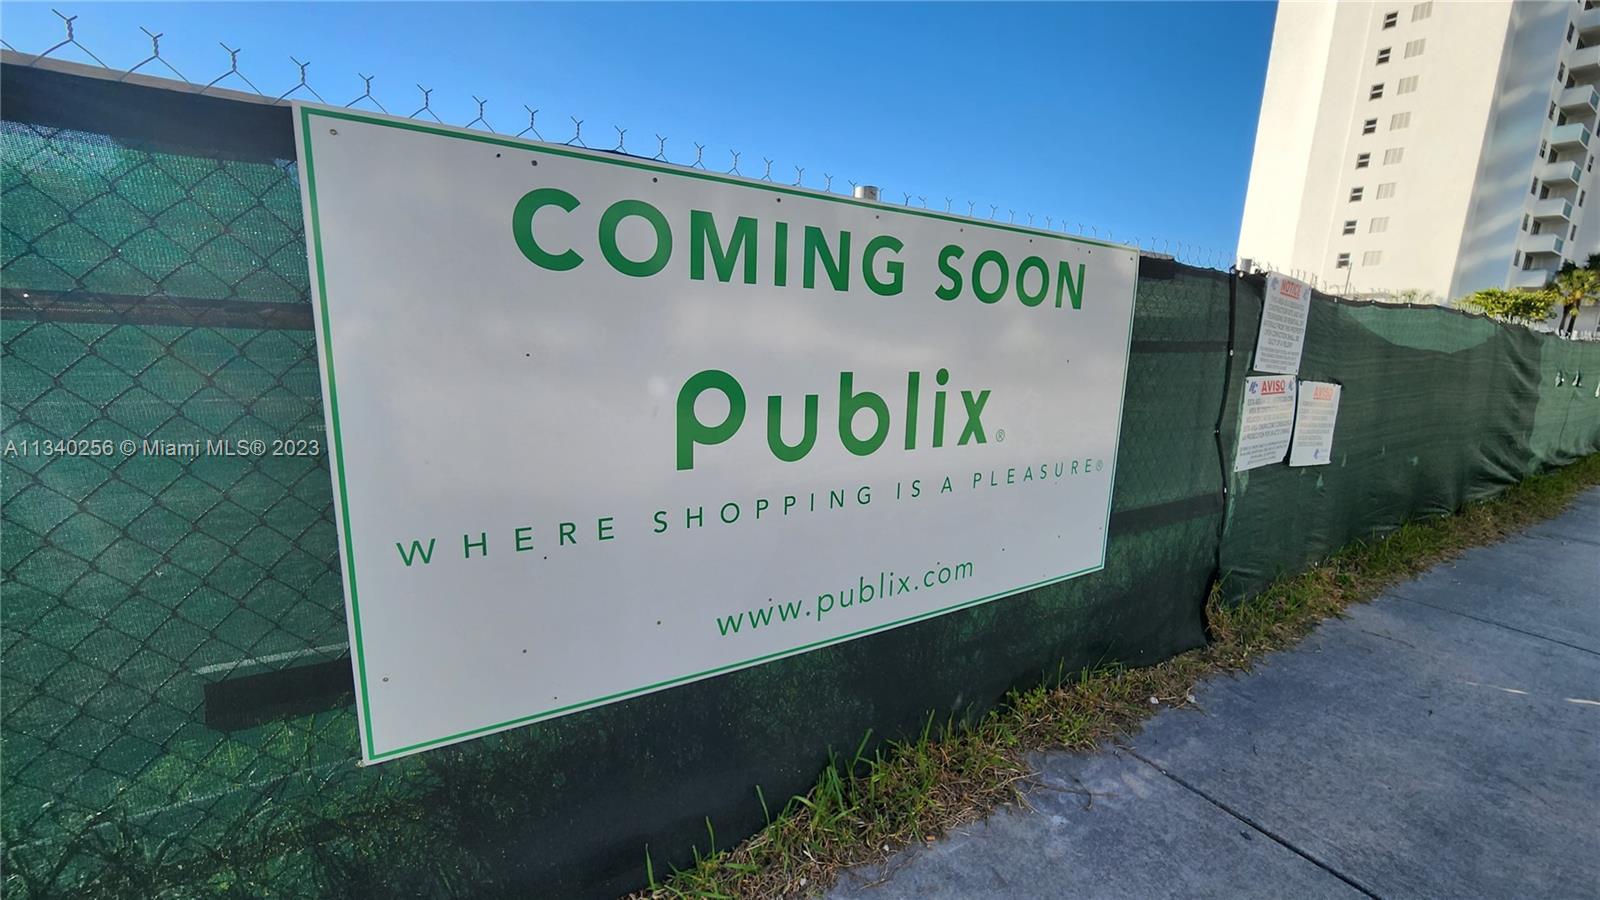 publix grocery etc onocean drive can walk 10 minutes or drive has marina coming too